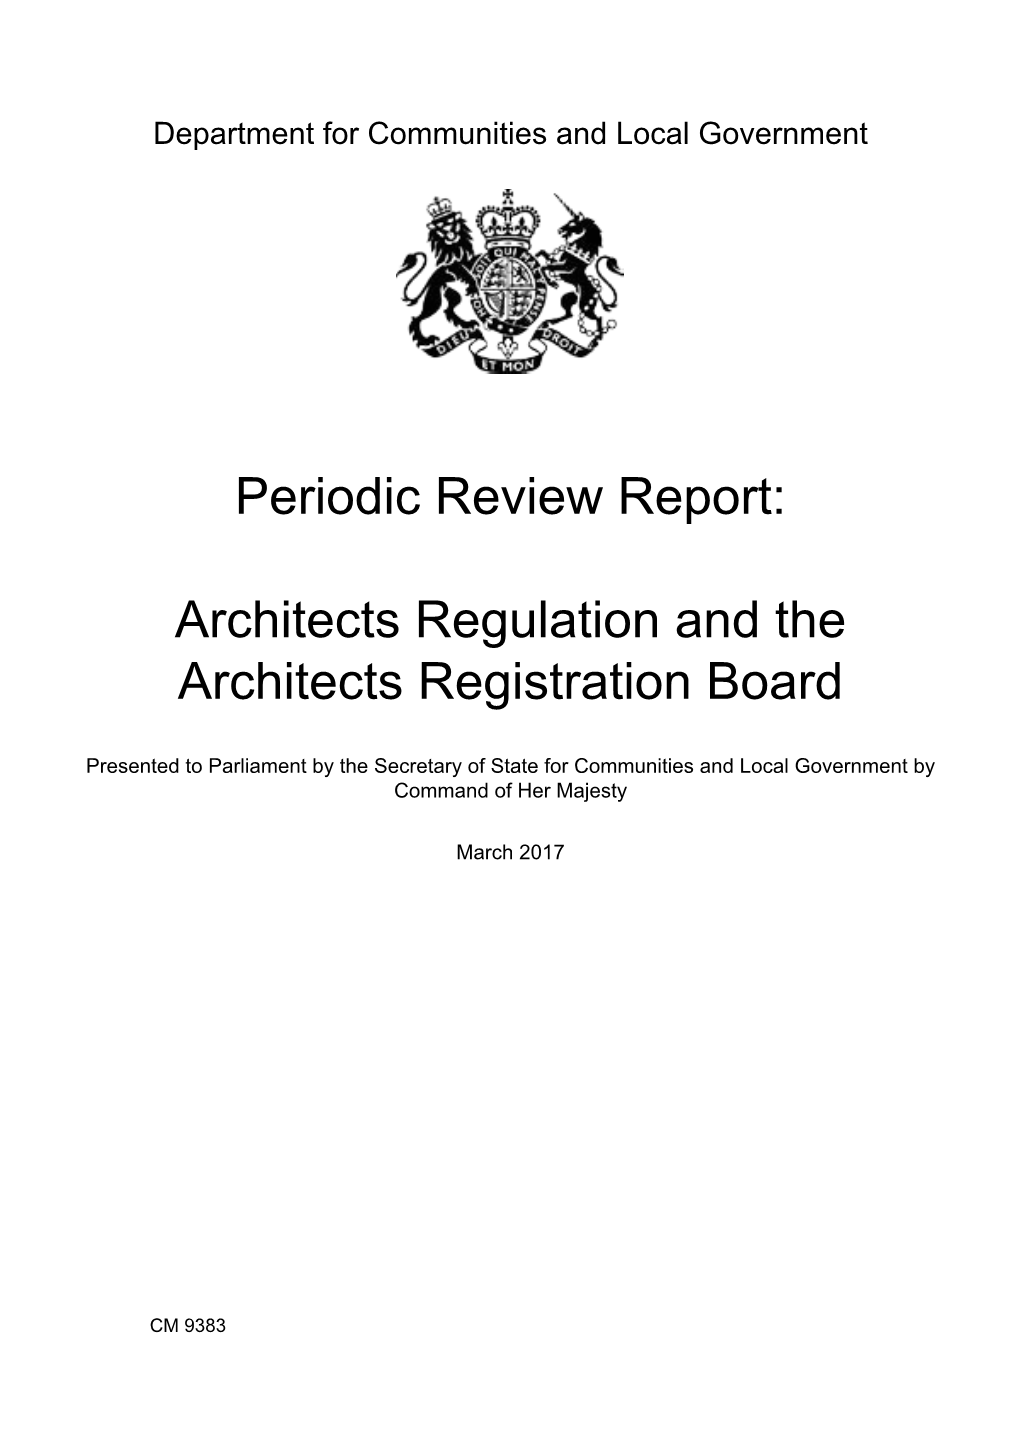 Architects Regulation and the Architects Registration Board